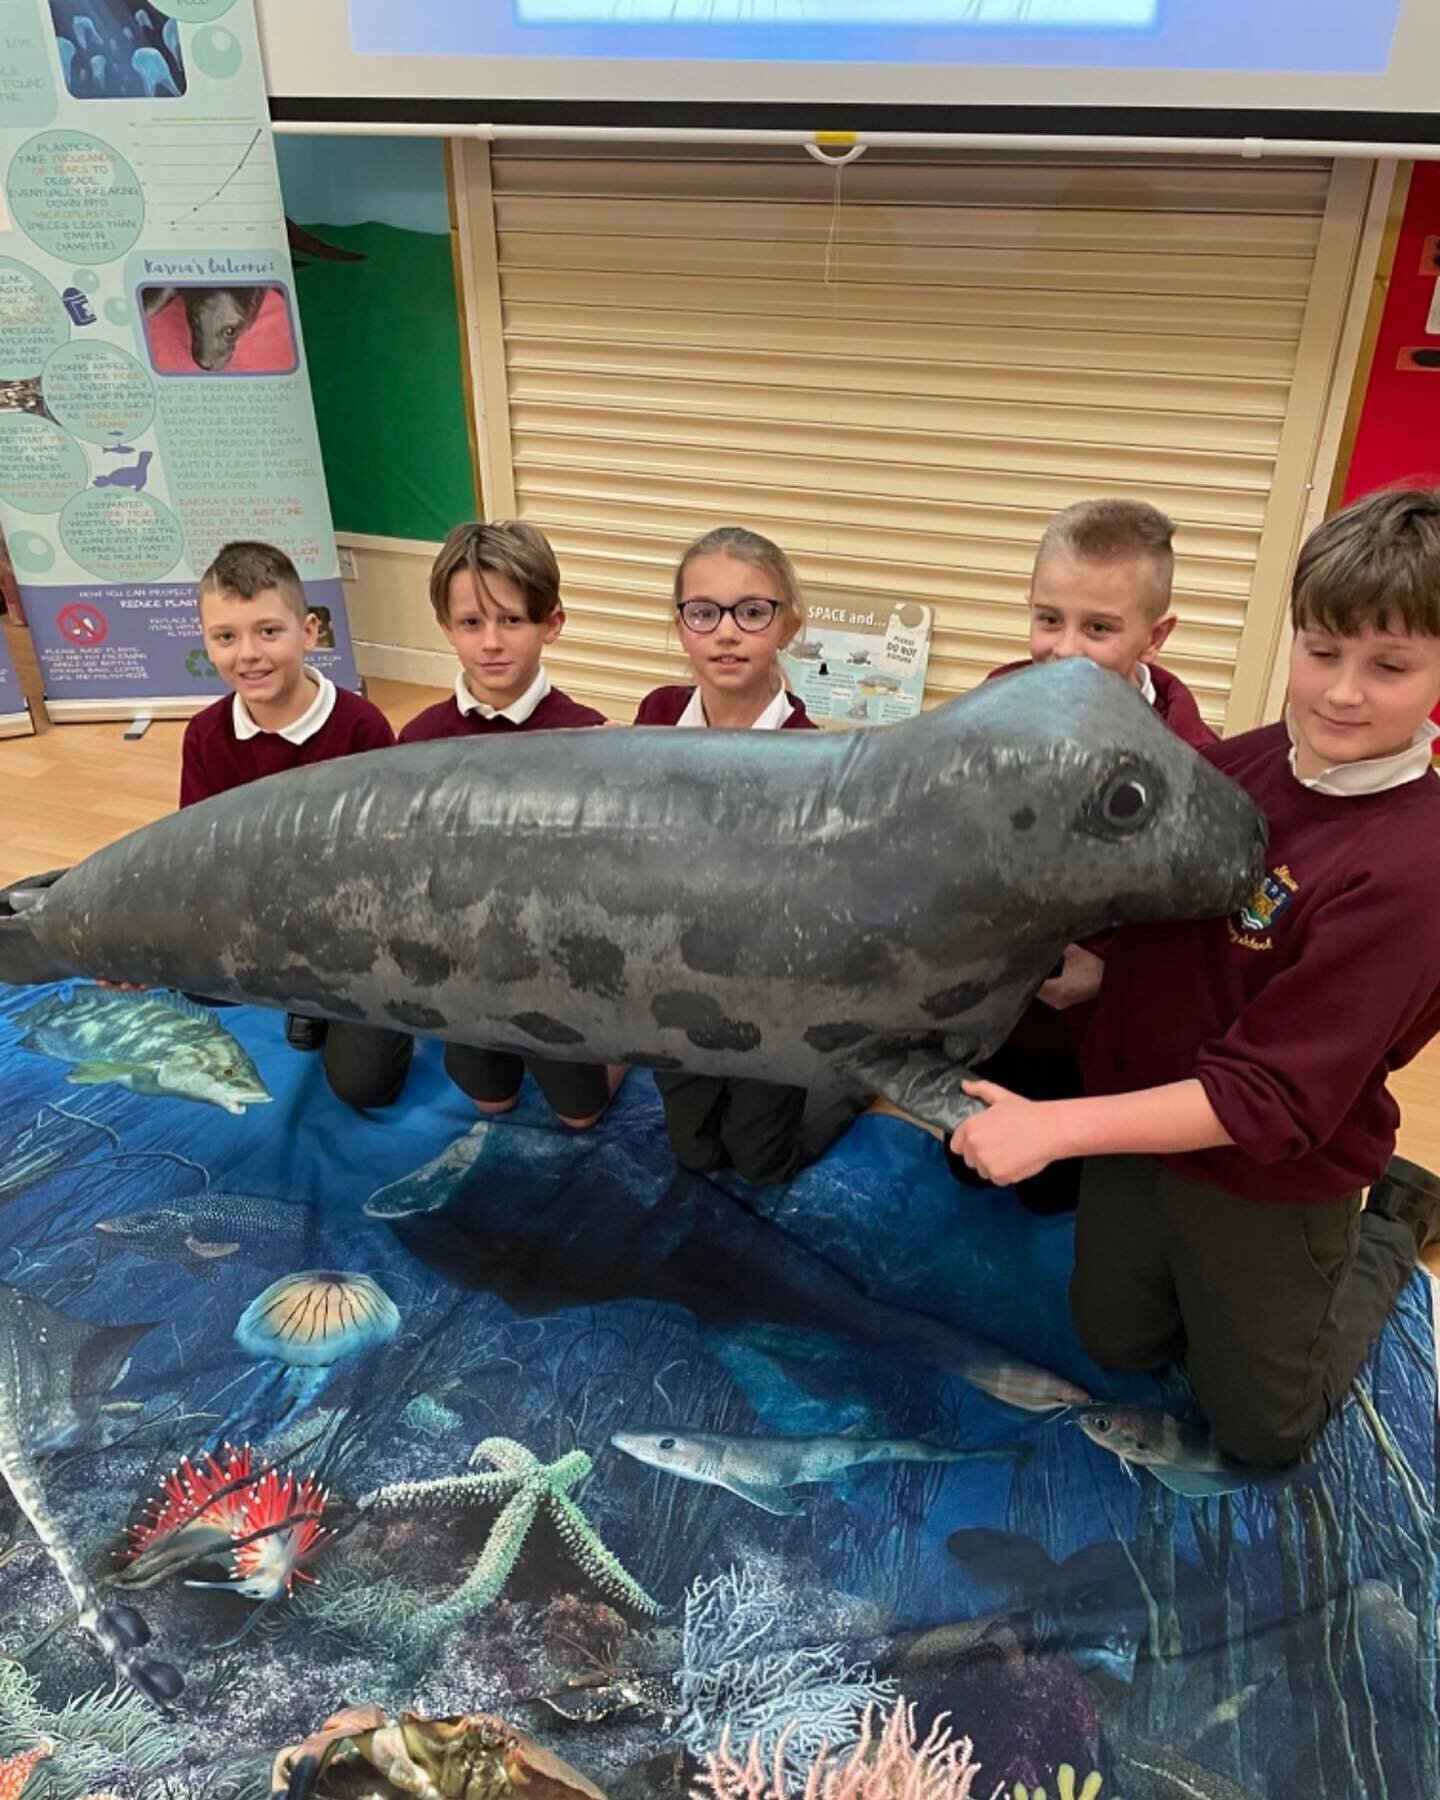 Another exciting visitor at Skipsea today- the Marine Conservation Society arrived to take a session about Yorkshire seals. The children learned lots about seals, and the threats they face. A fantastic opportunity to apply the science we have learned